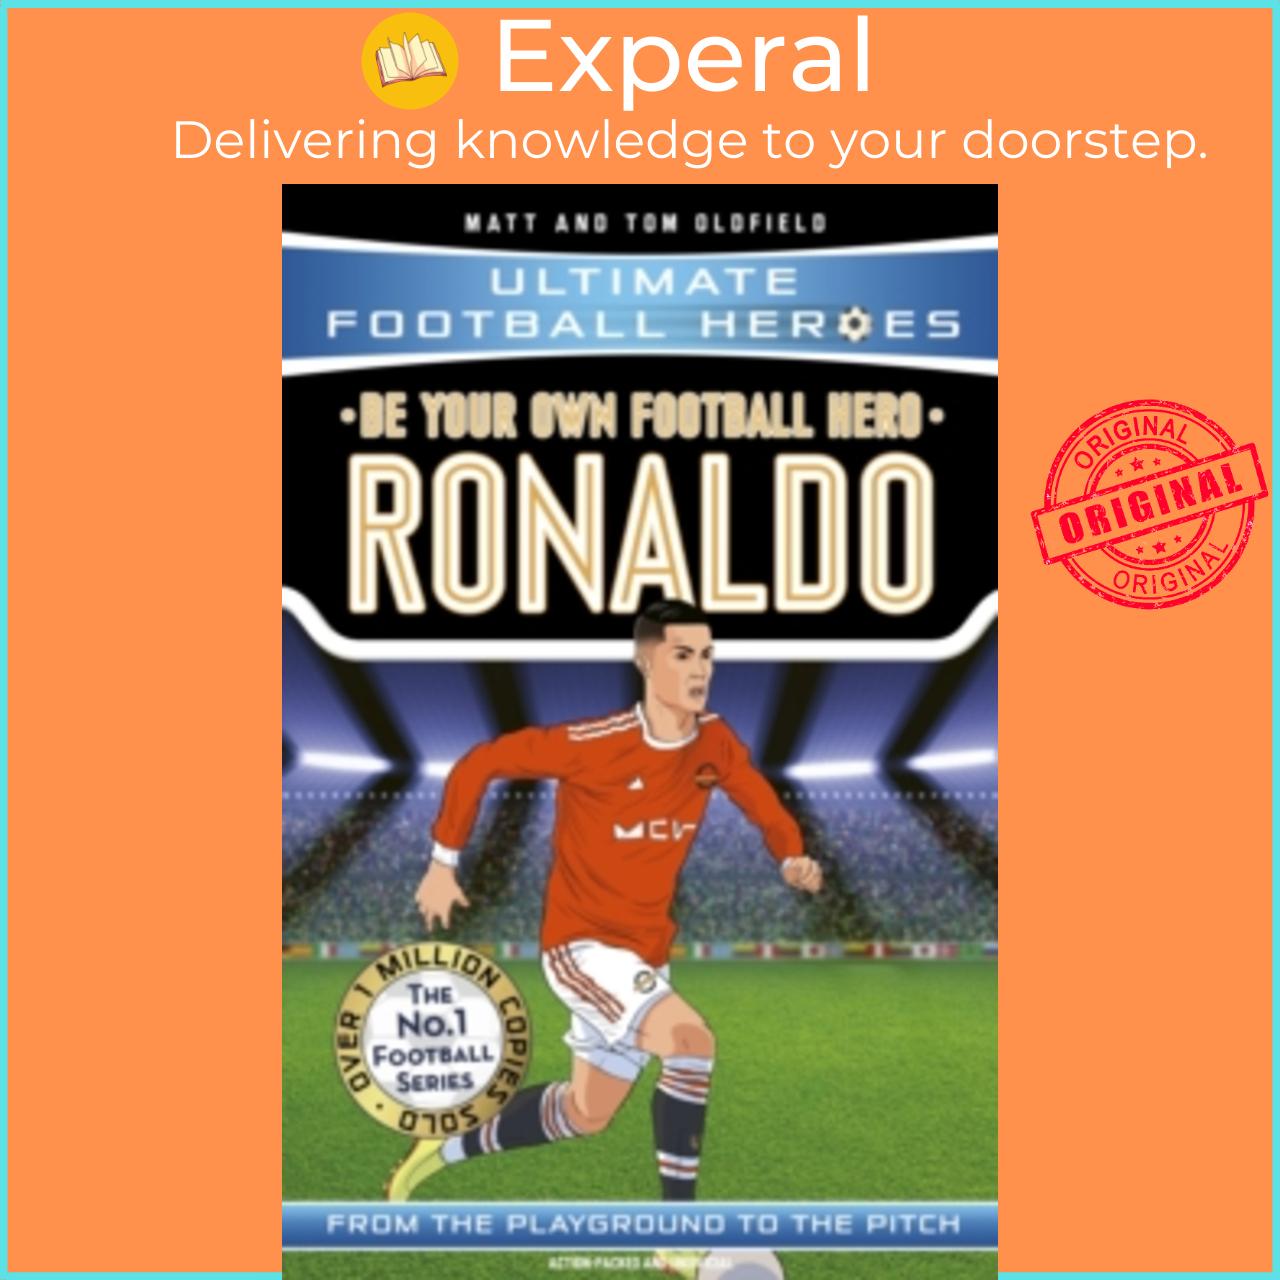 Sách - Be Your Own Football Hero: Ronaldo by Matt &amp; Tom Oldfield (UK edition, paperback)